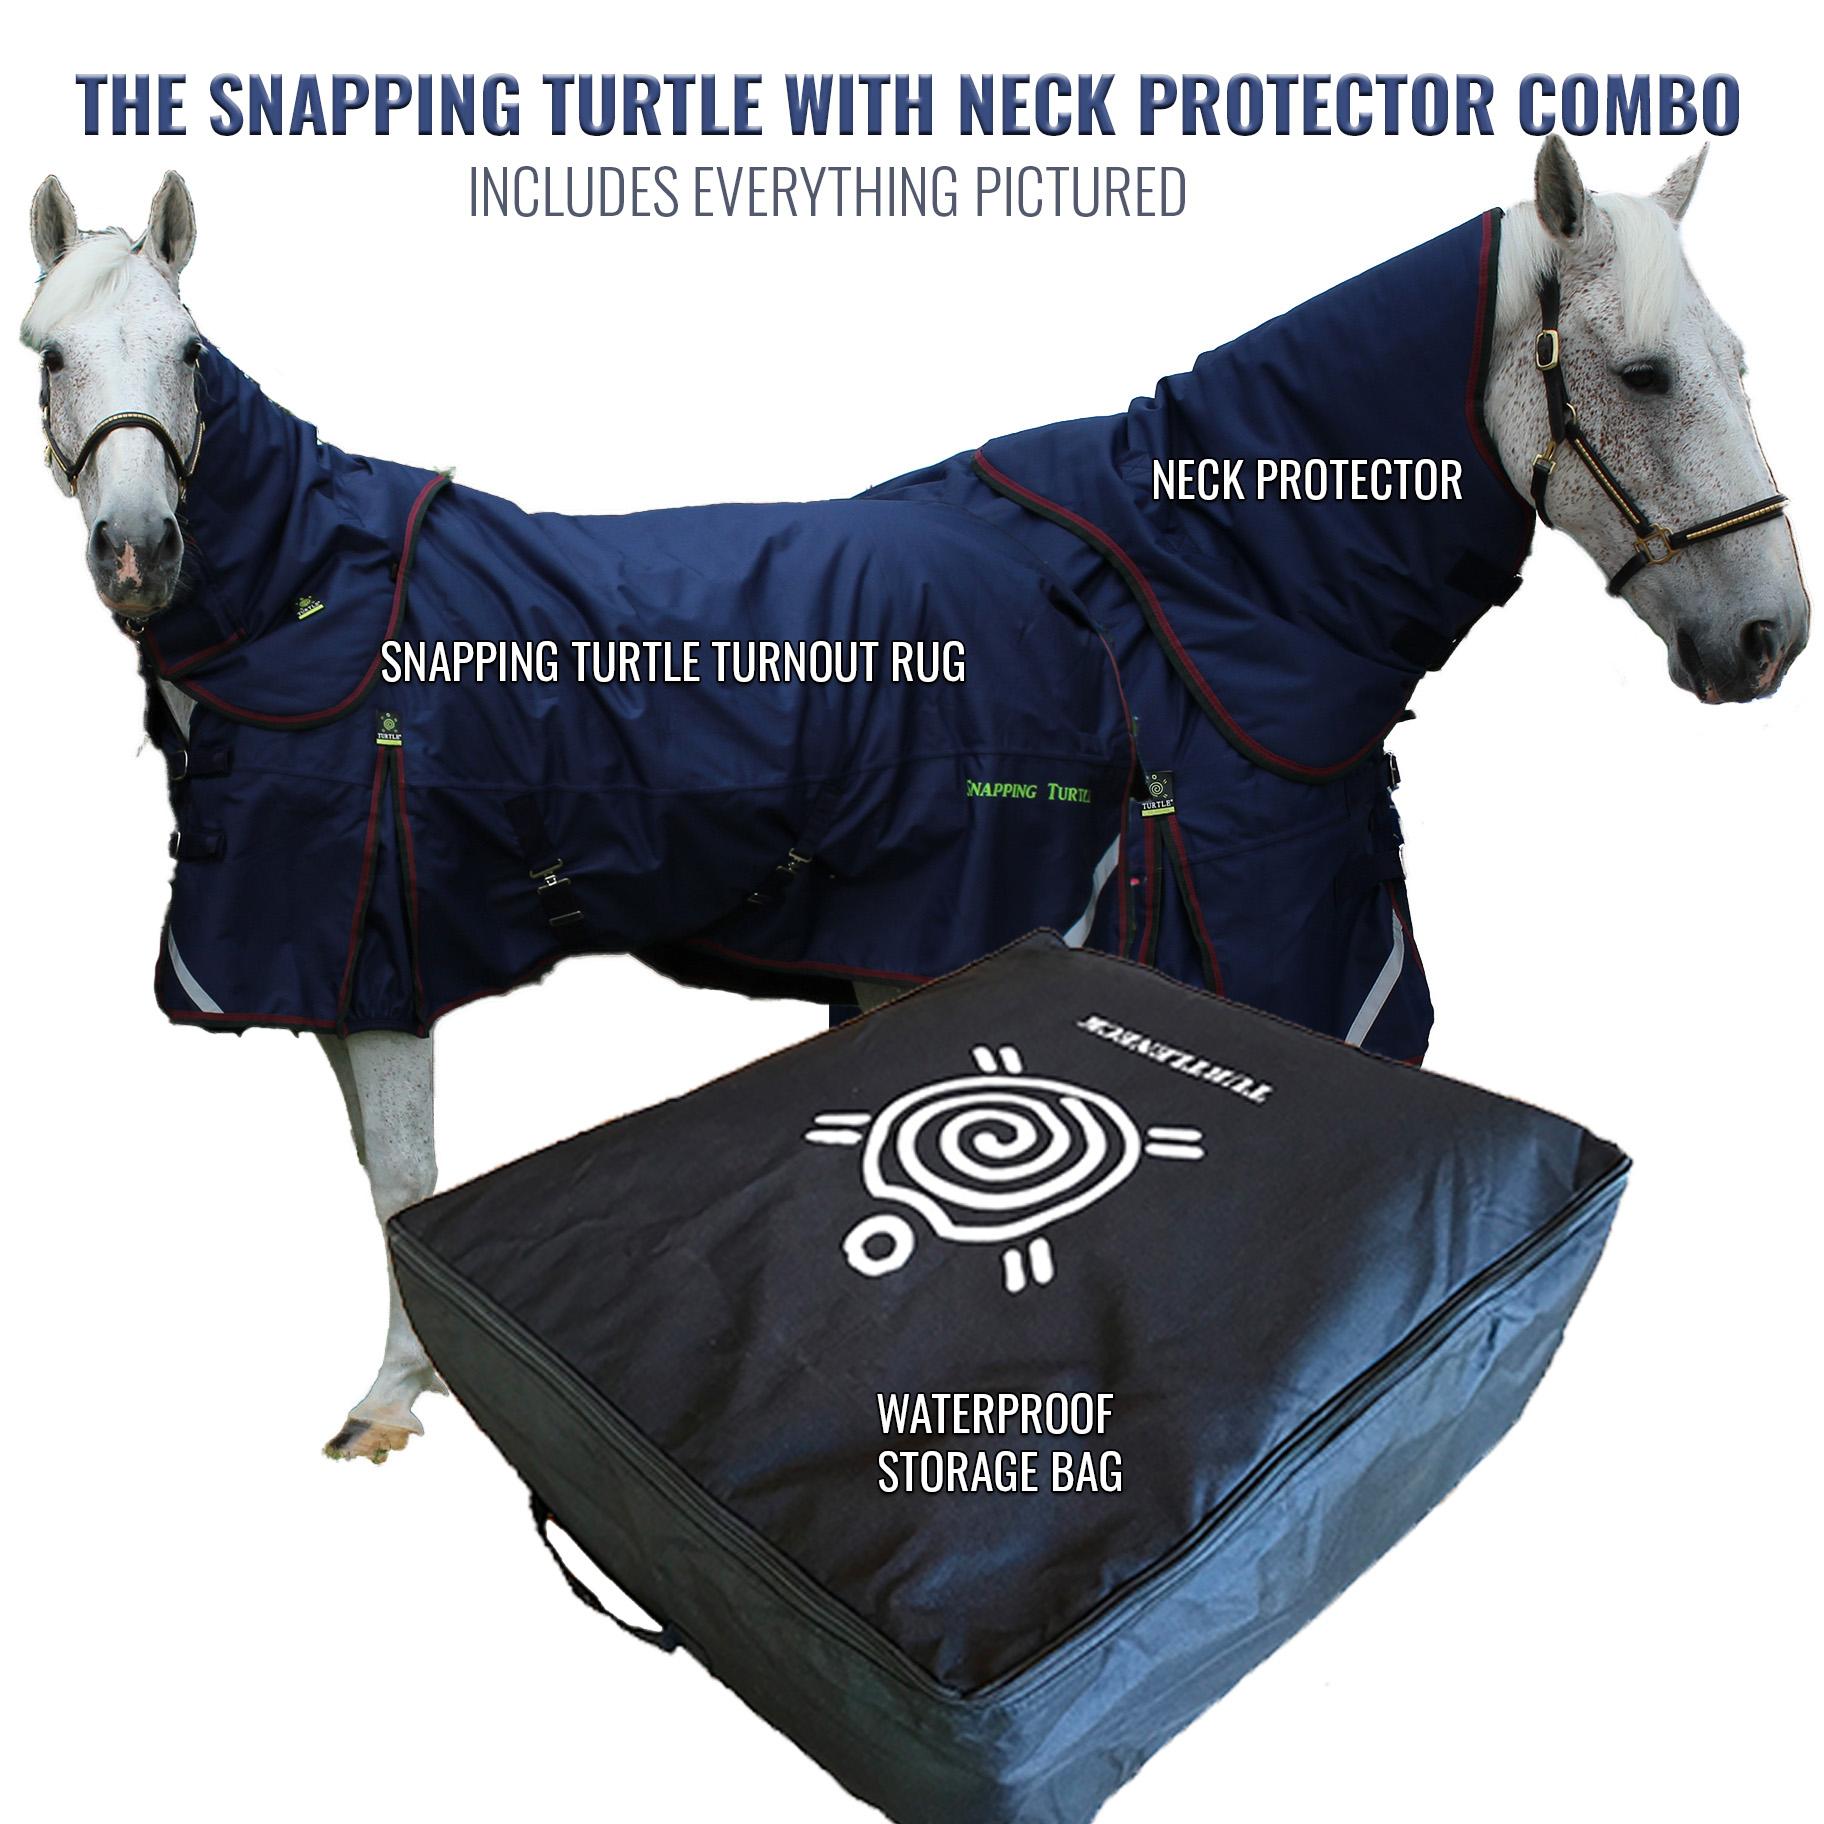 The Snapping Turtle with Neck Protector Combo from TurtleNeck Premium Horse Clothing